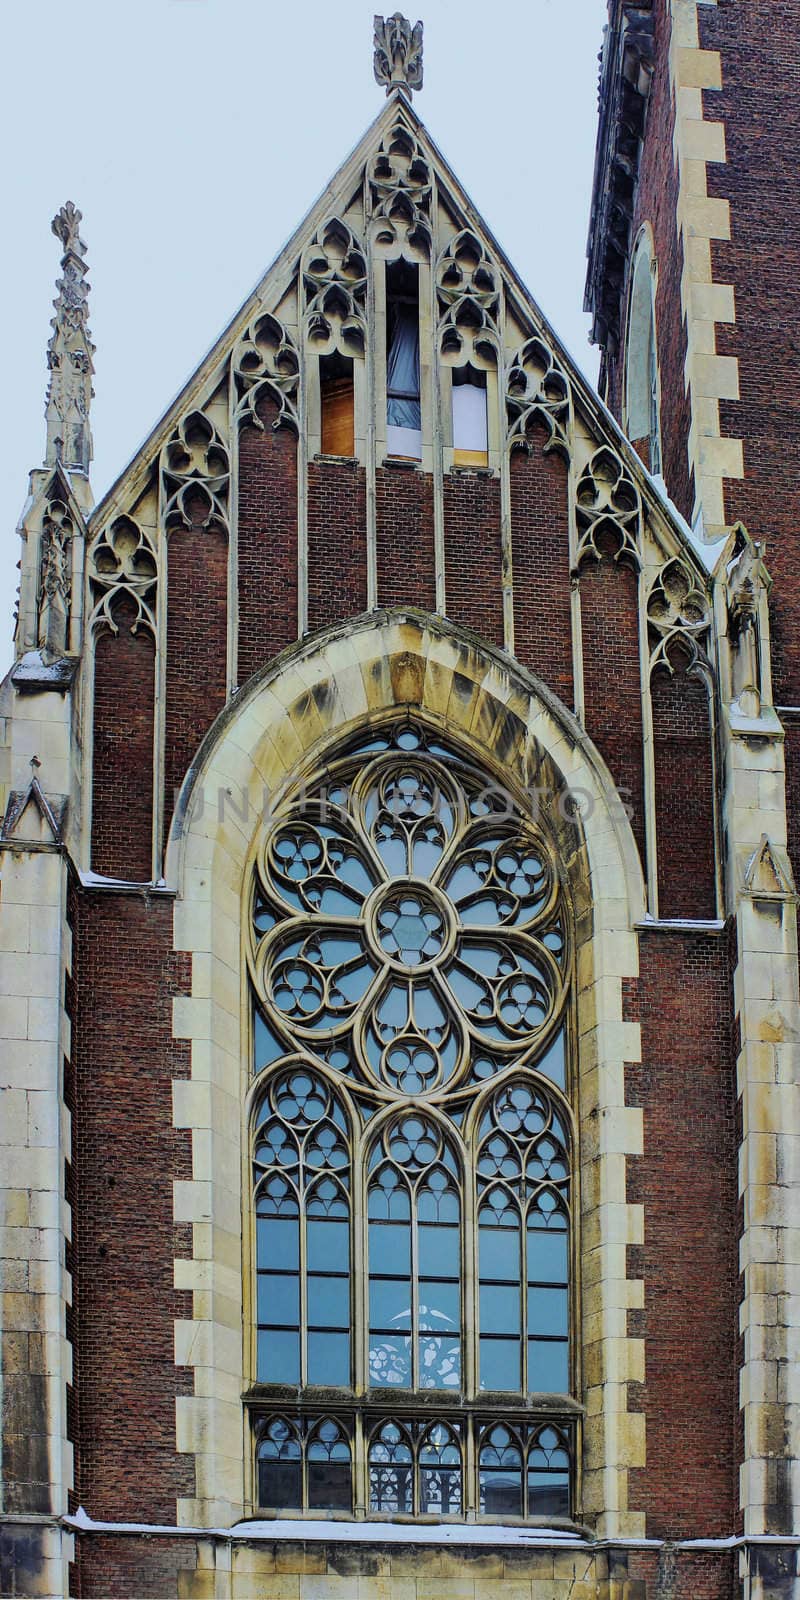 The facade of the Catholic Church for designers